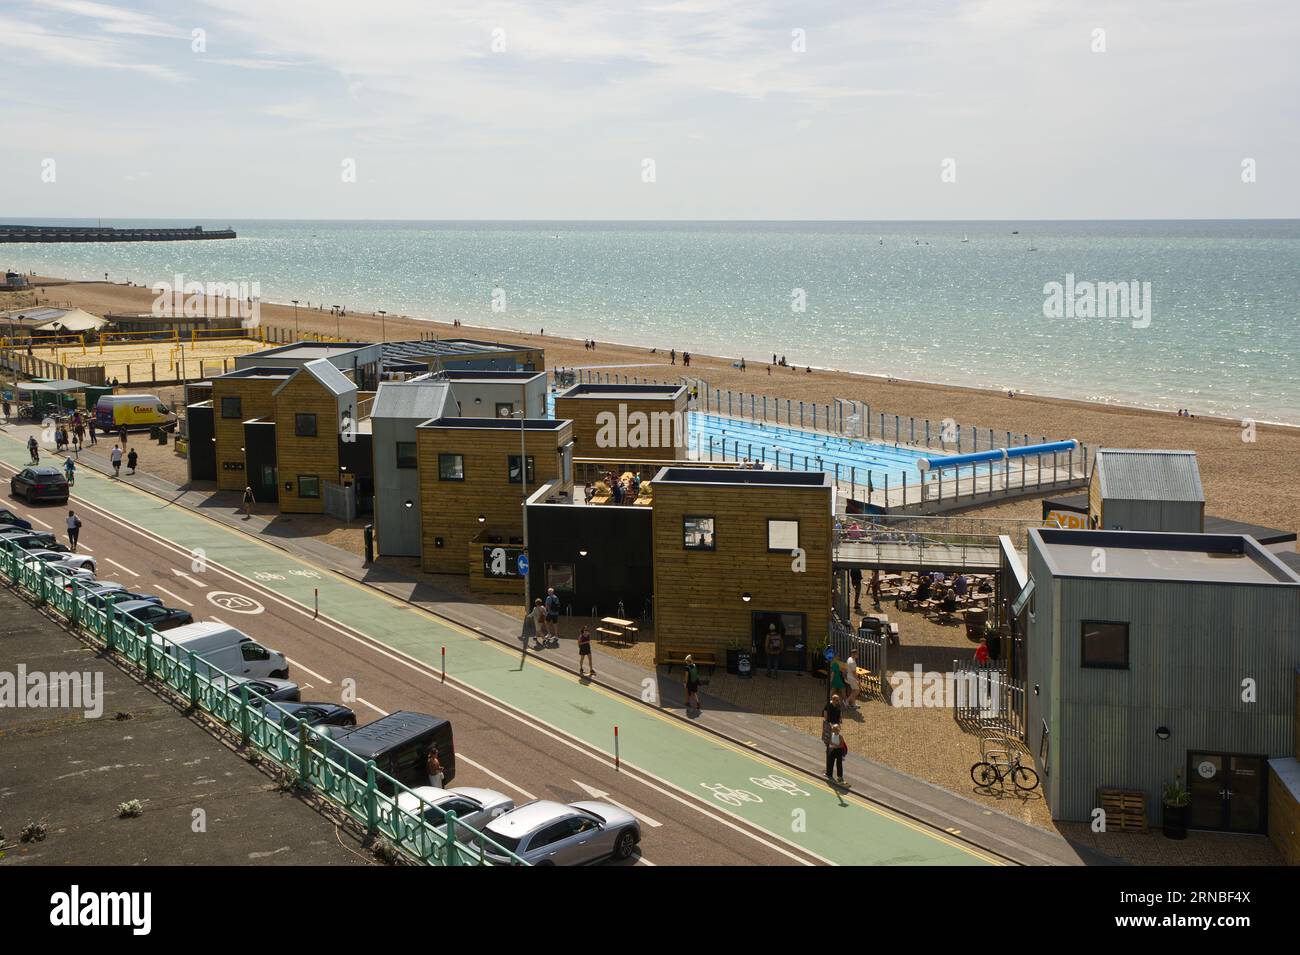 New swimming pool and restaurant complex on the seafront at Brighton in East Sussex, England Stock Photo